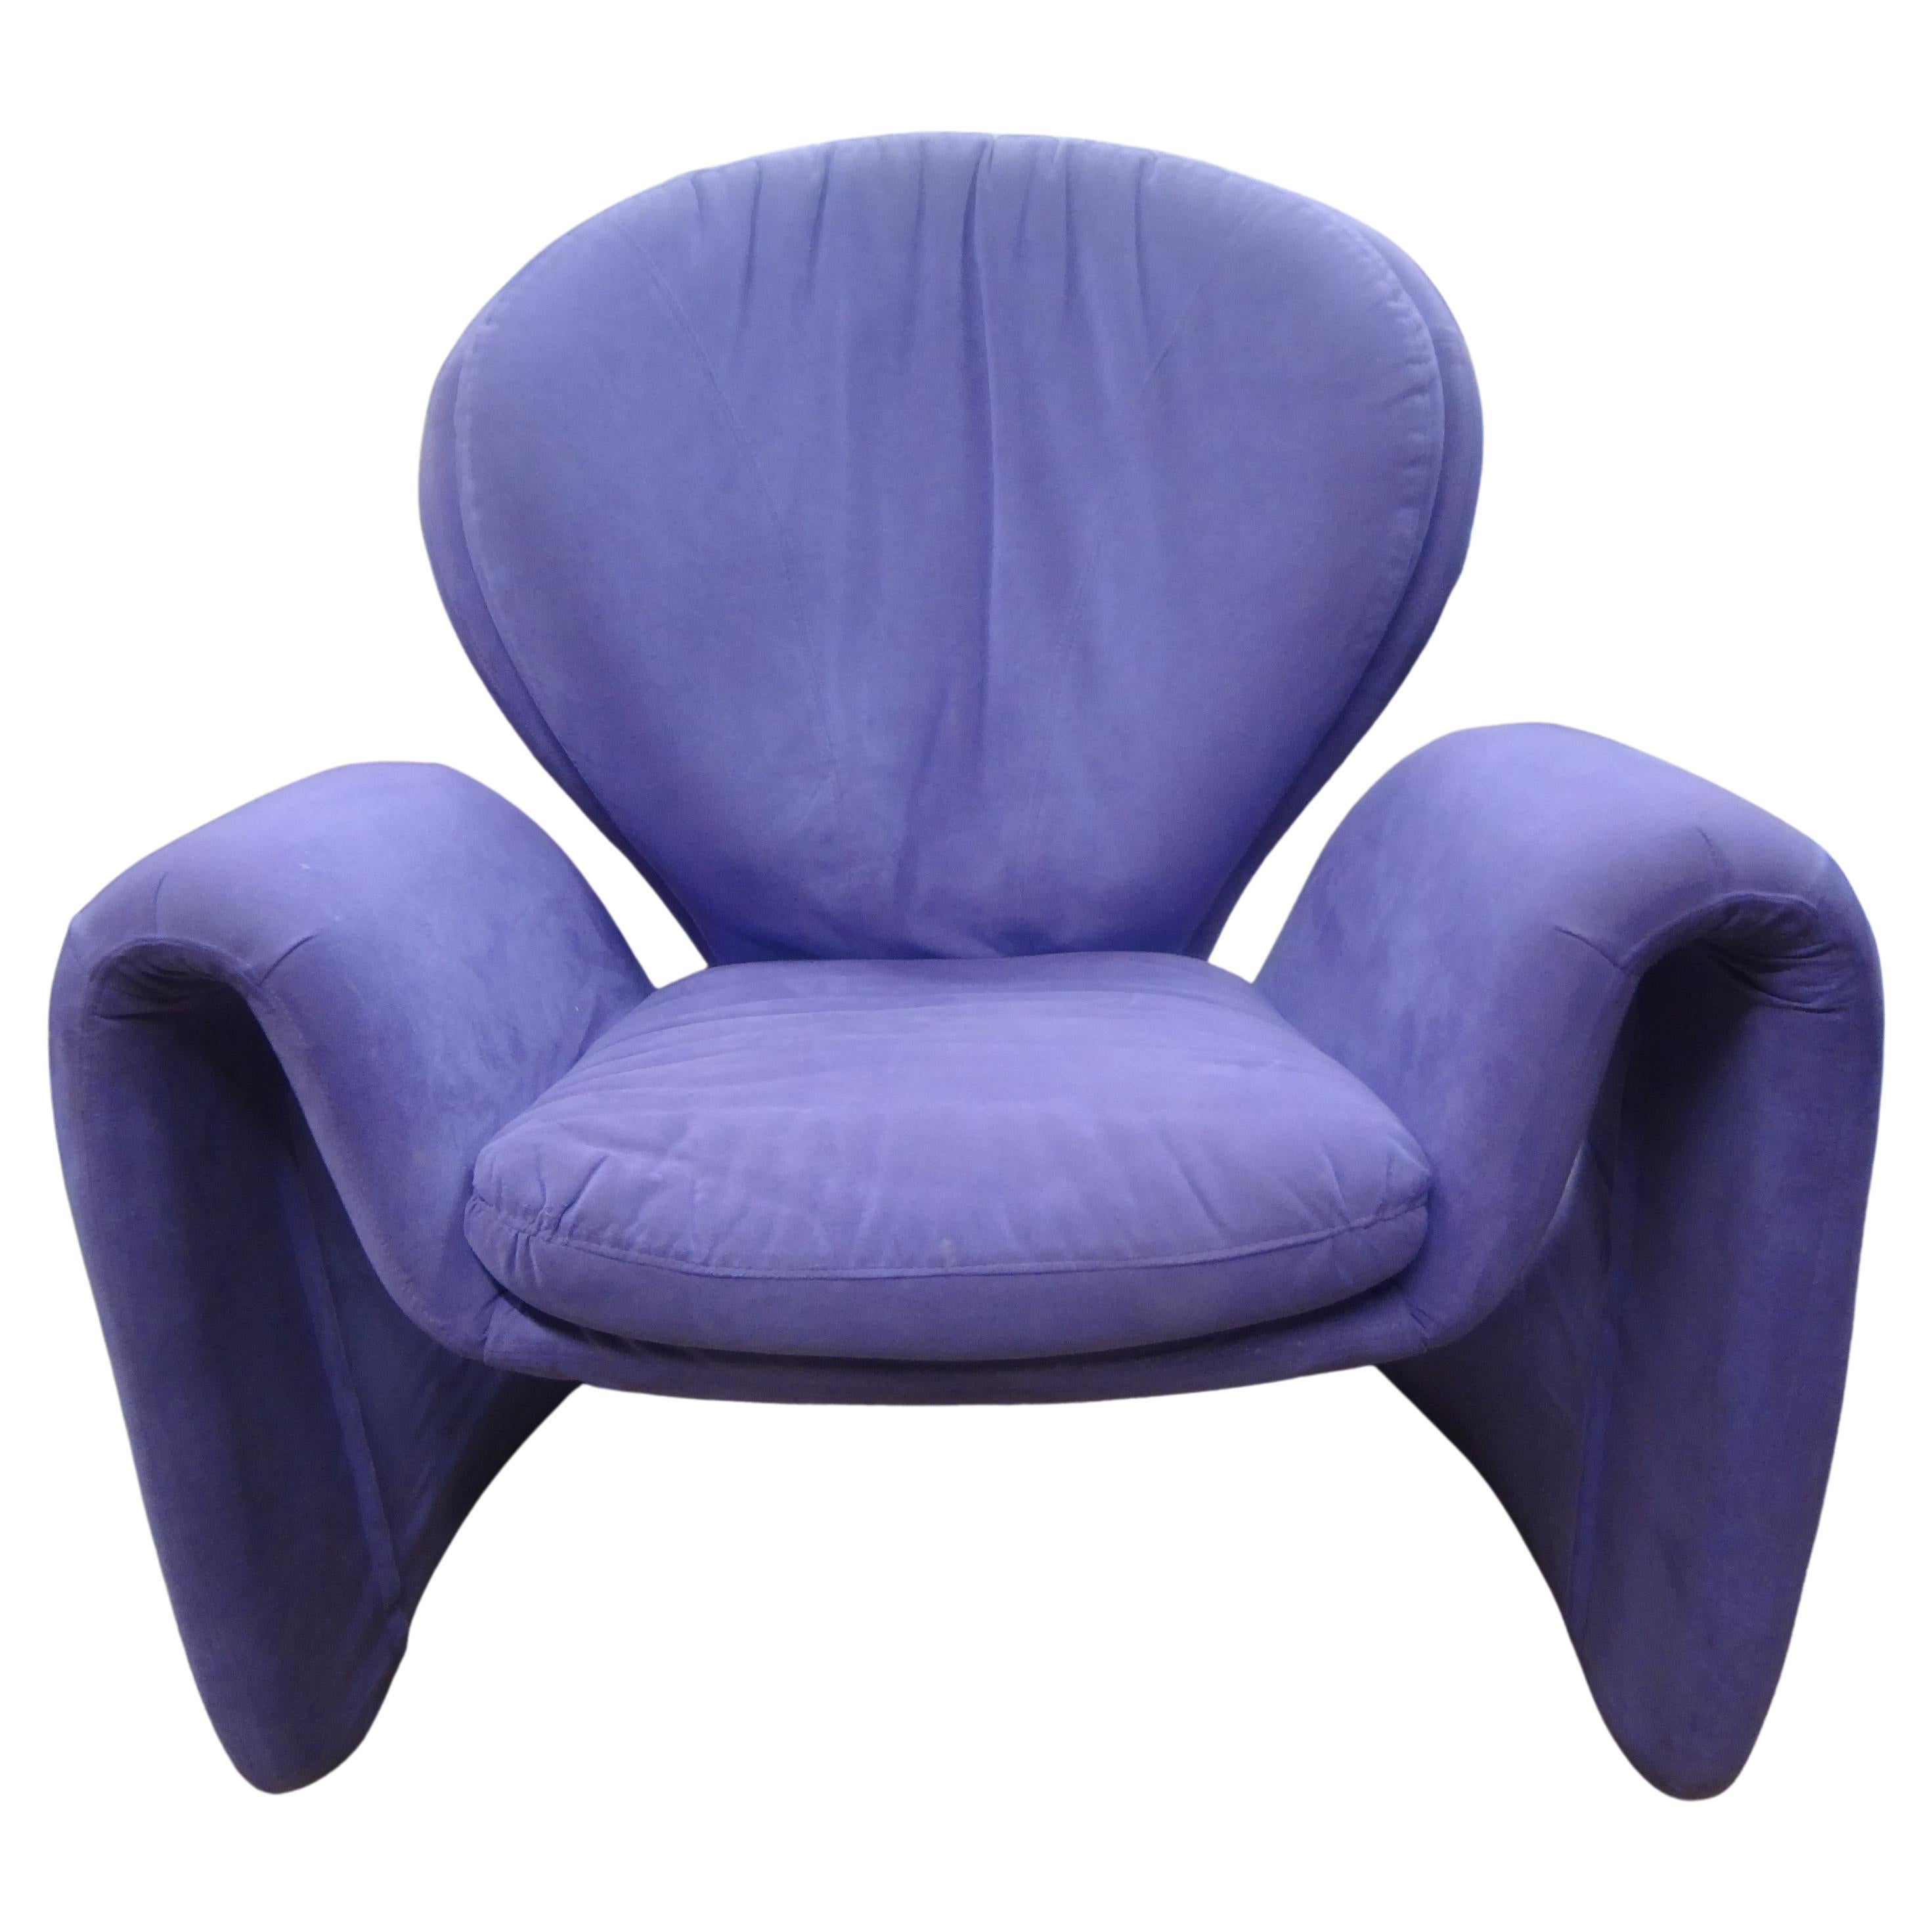 Italian Modern Sculptural Lounge Chair Attributed To Vittorio Introini  For Sale